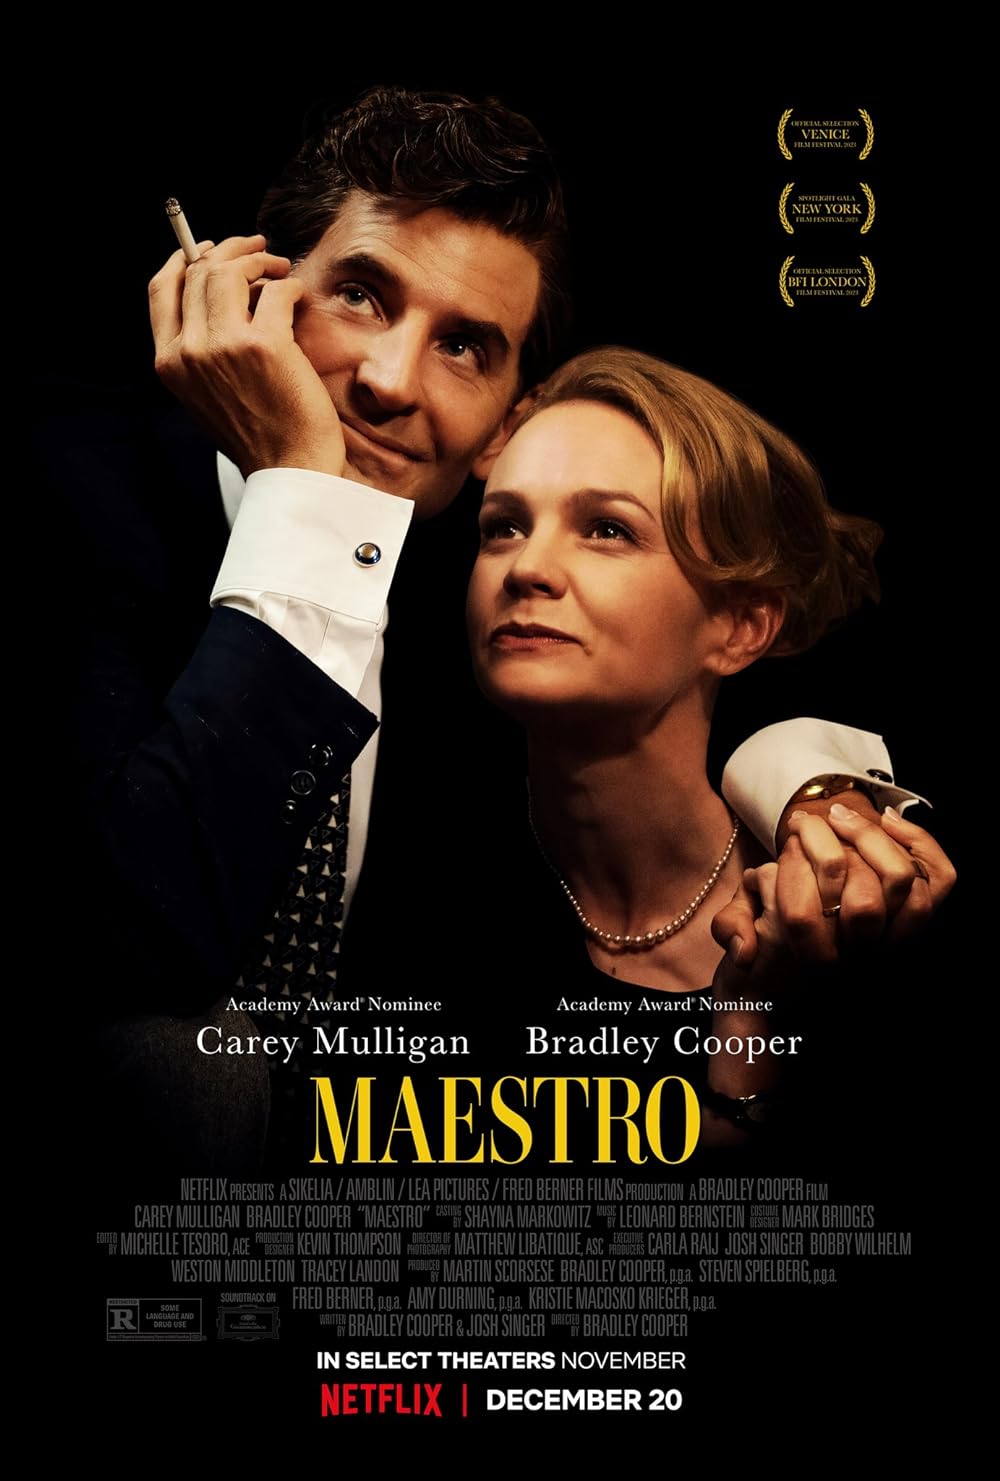 Maestro (December 20) - Streaming on NetflixDirected by and starring Bradley Cooper, 